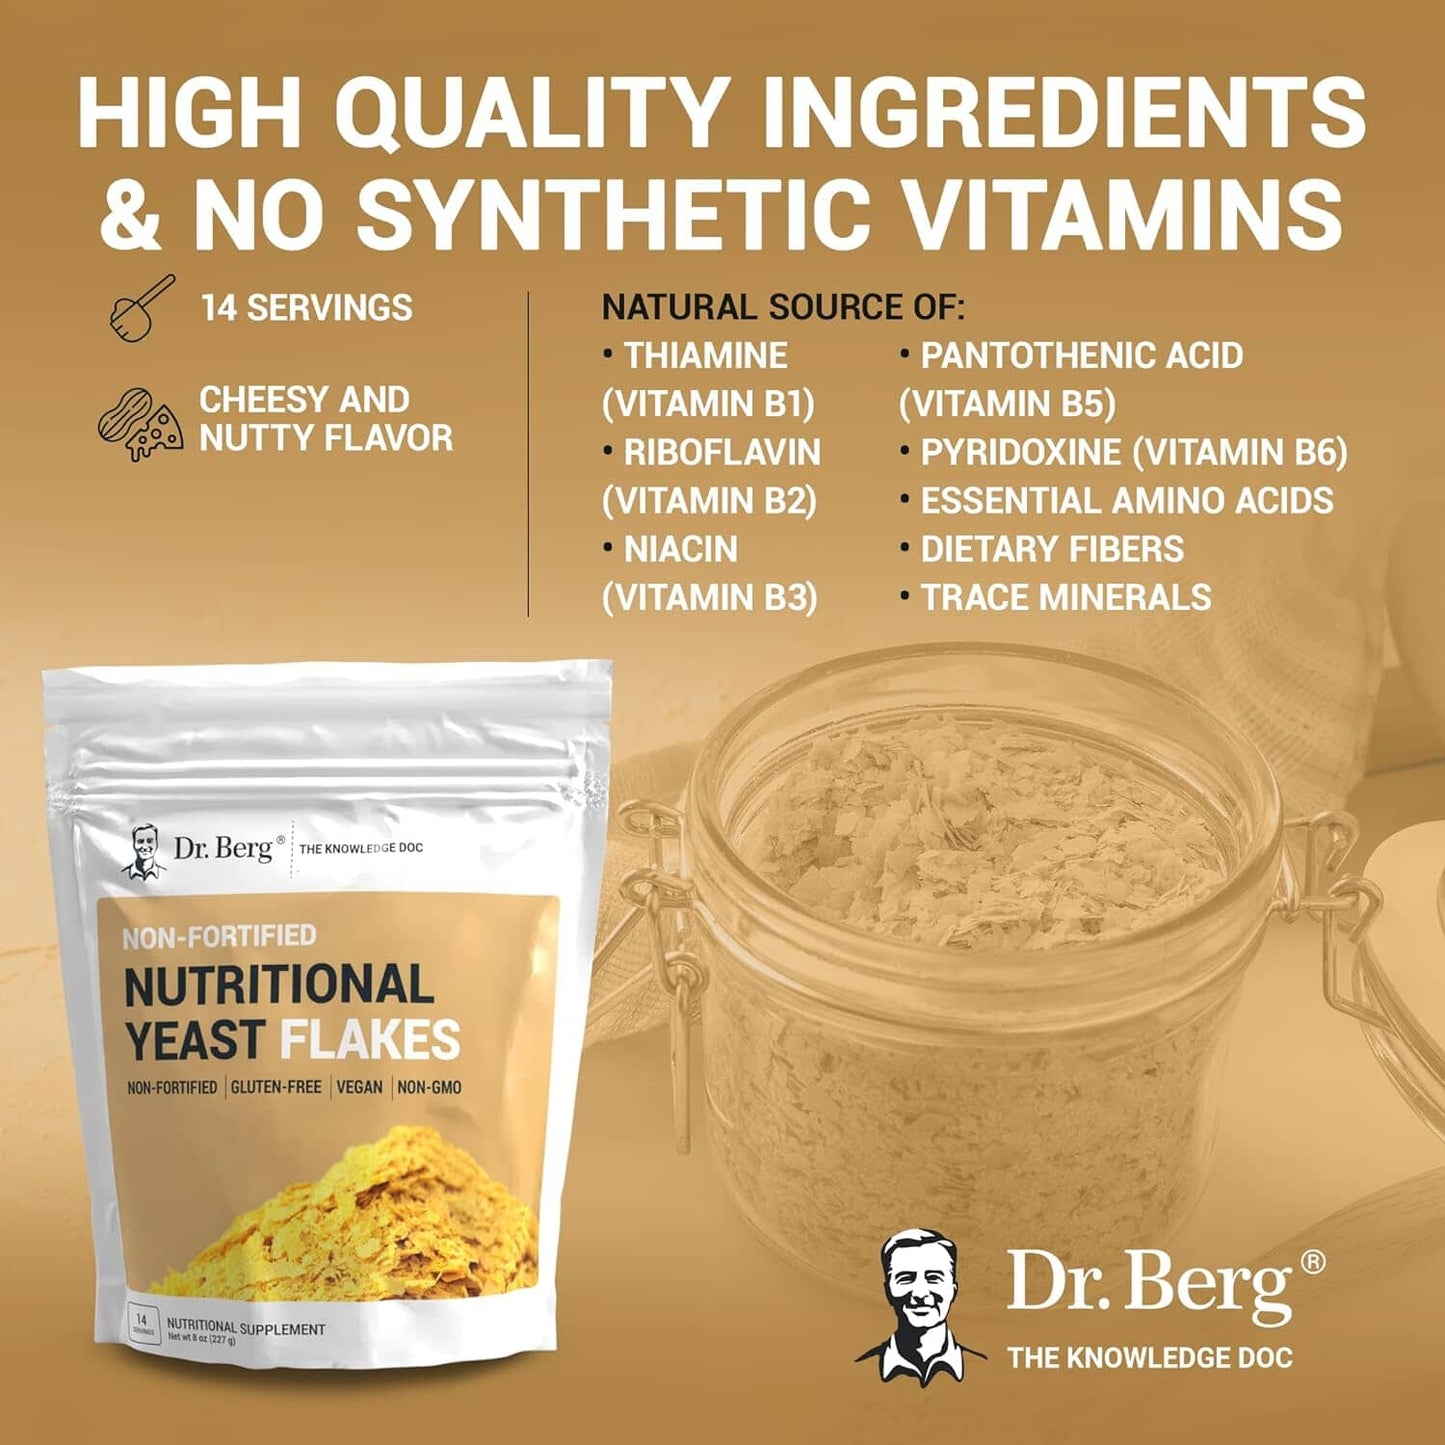 Dr. Berg Premium Nutritional Yeast Flakes - Delicious Non-Fortified Nutritional Yeast with Naturally Occurring B Vitamins - 8oz